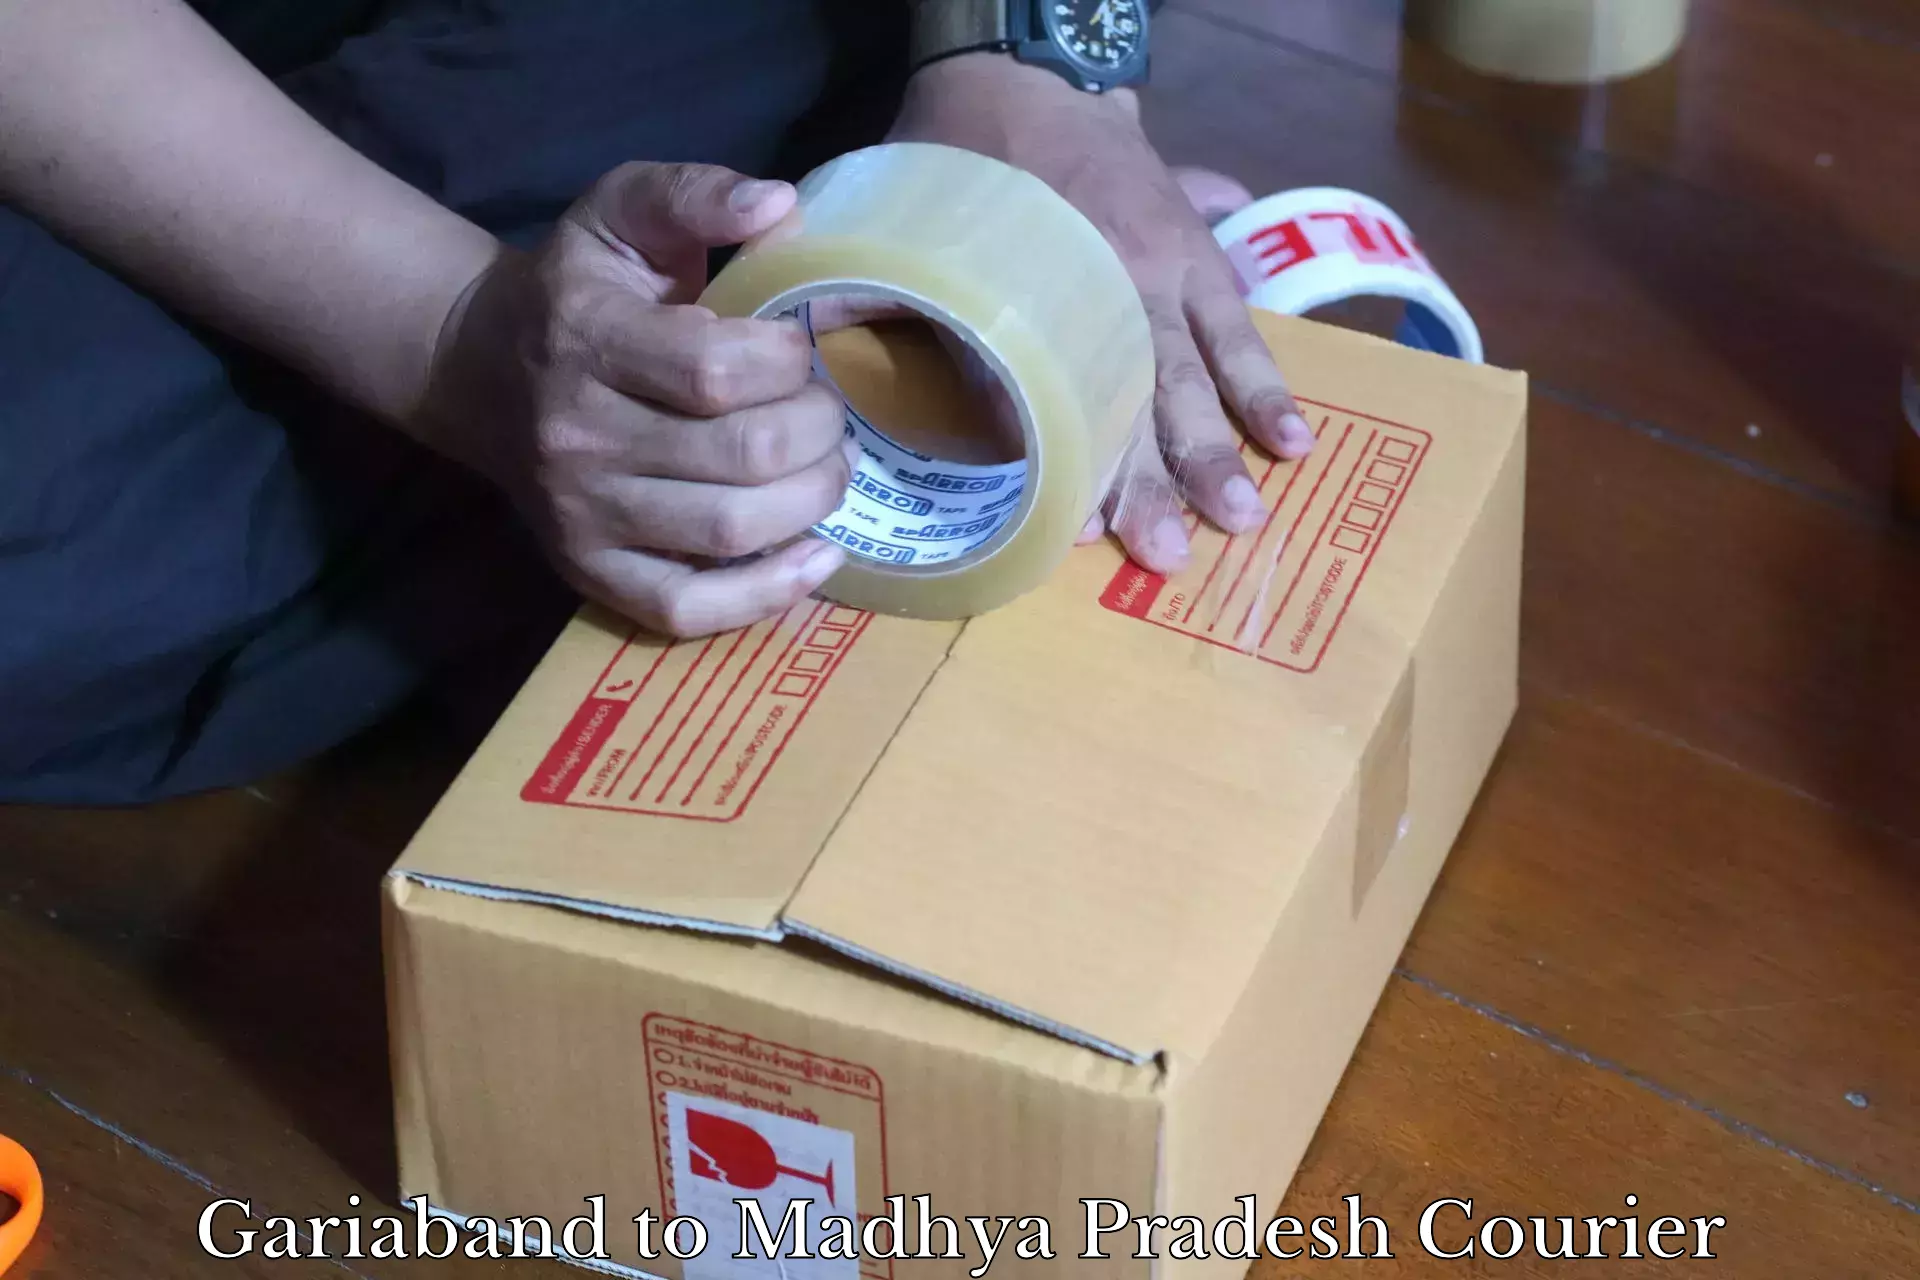 Expedited shipping methods Gariaband to IIIT Bhopal